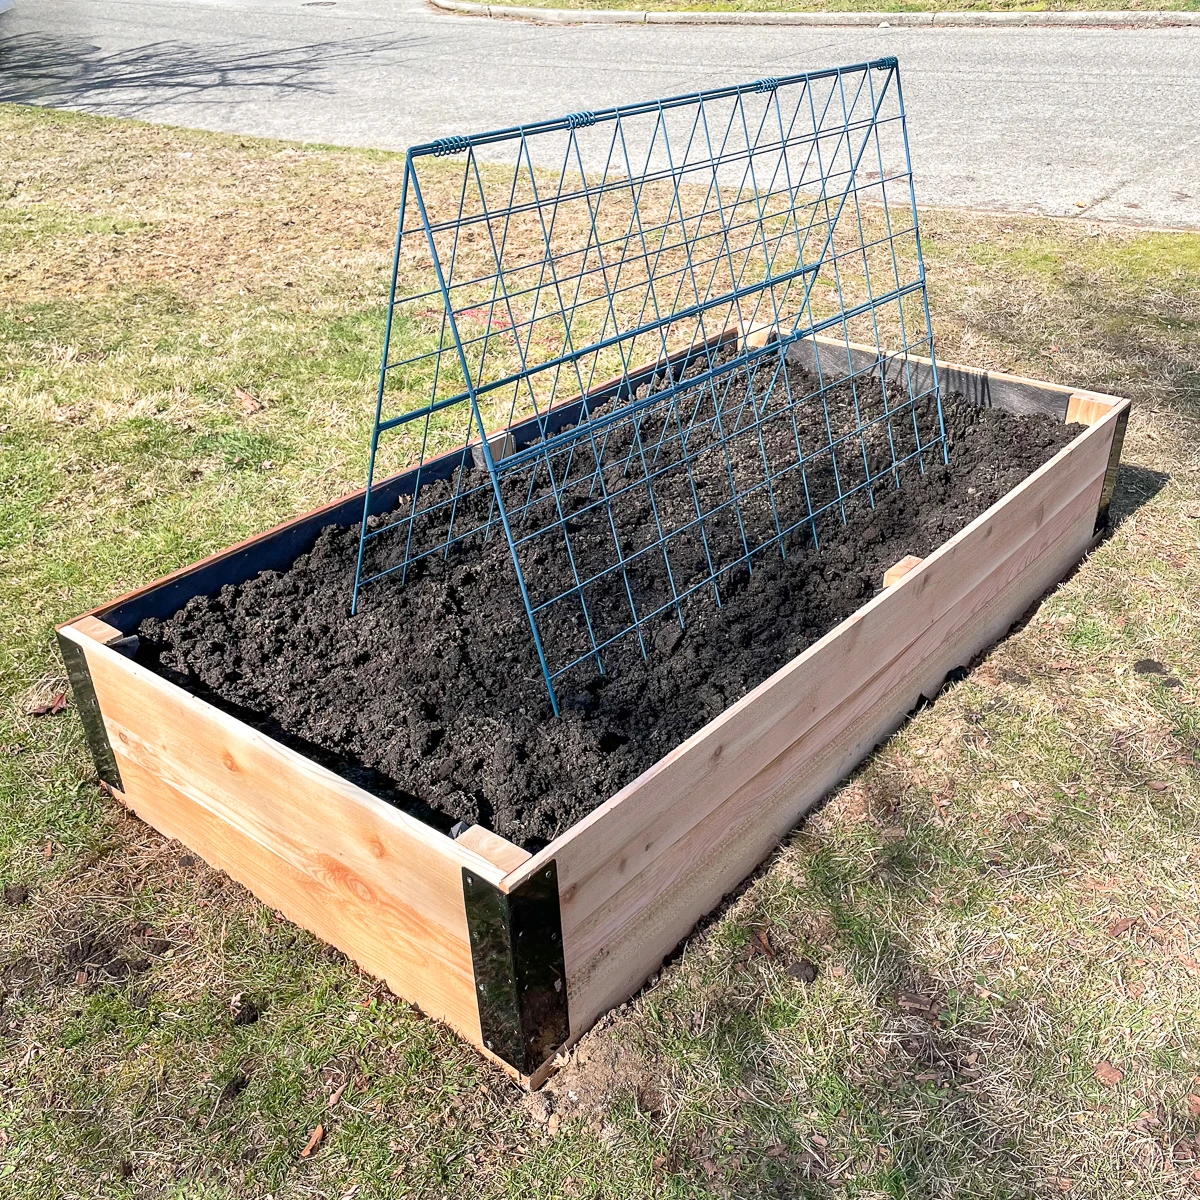 DIY raised garden bed filled with soil with an A frame trellis in the middle